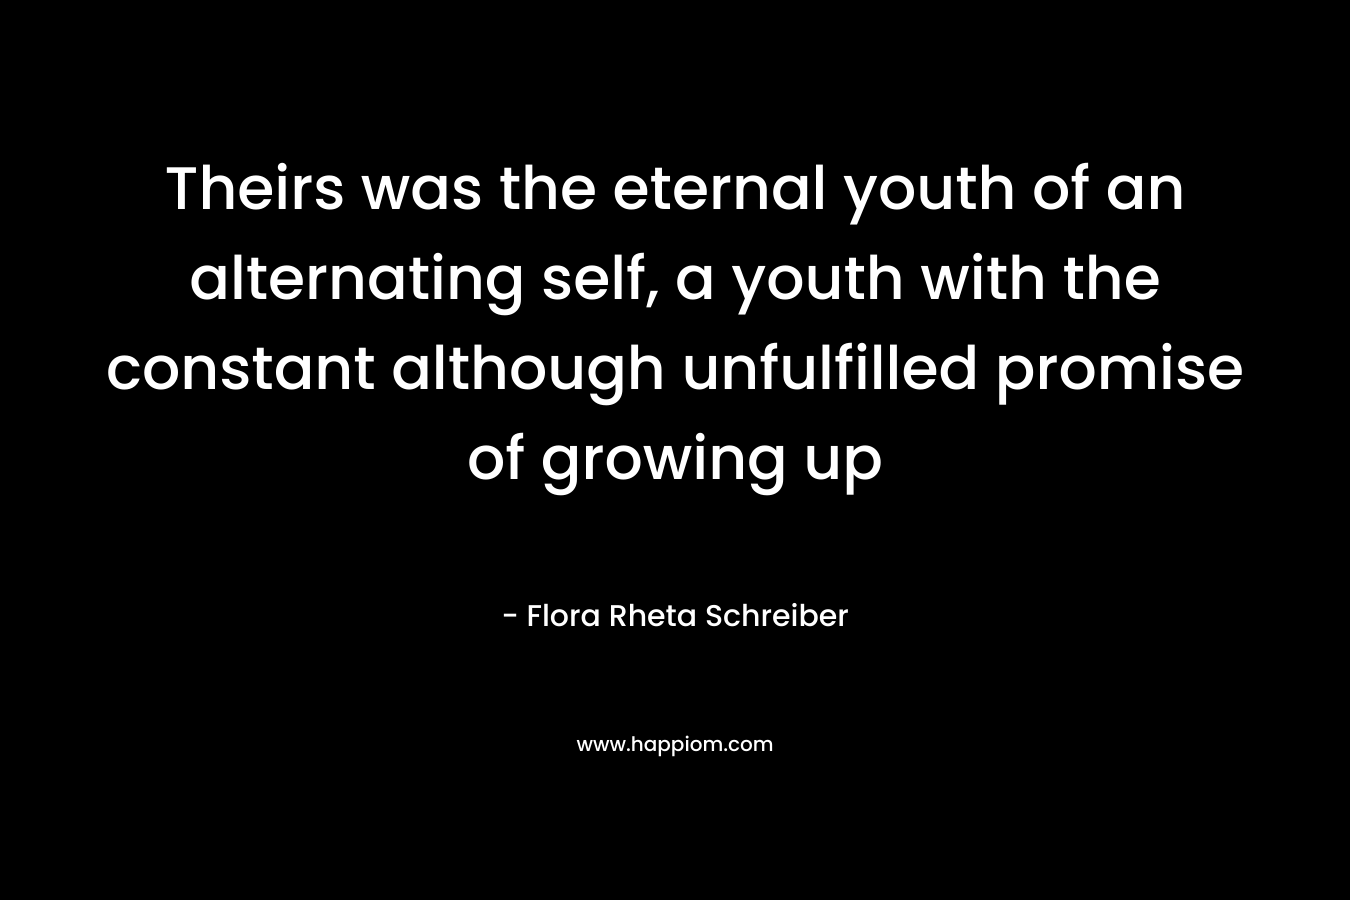 Theirs was the eternal youth of an alternating self, a youth with the constant although unfulfilled promise of growing up – Flora Rheta Schreiber